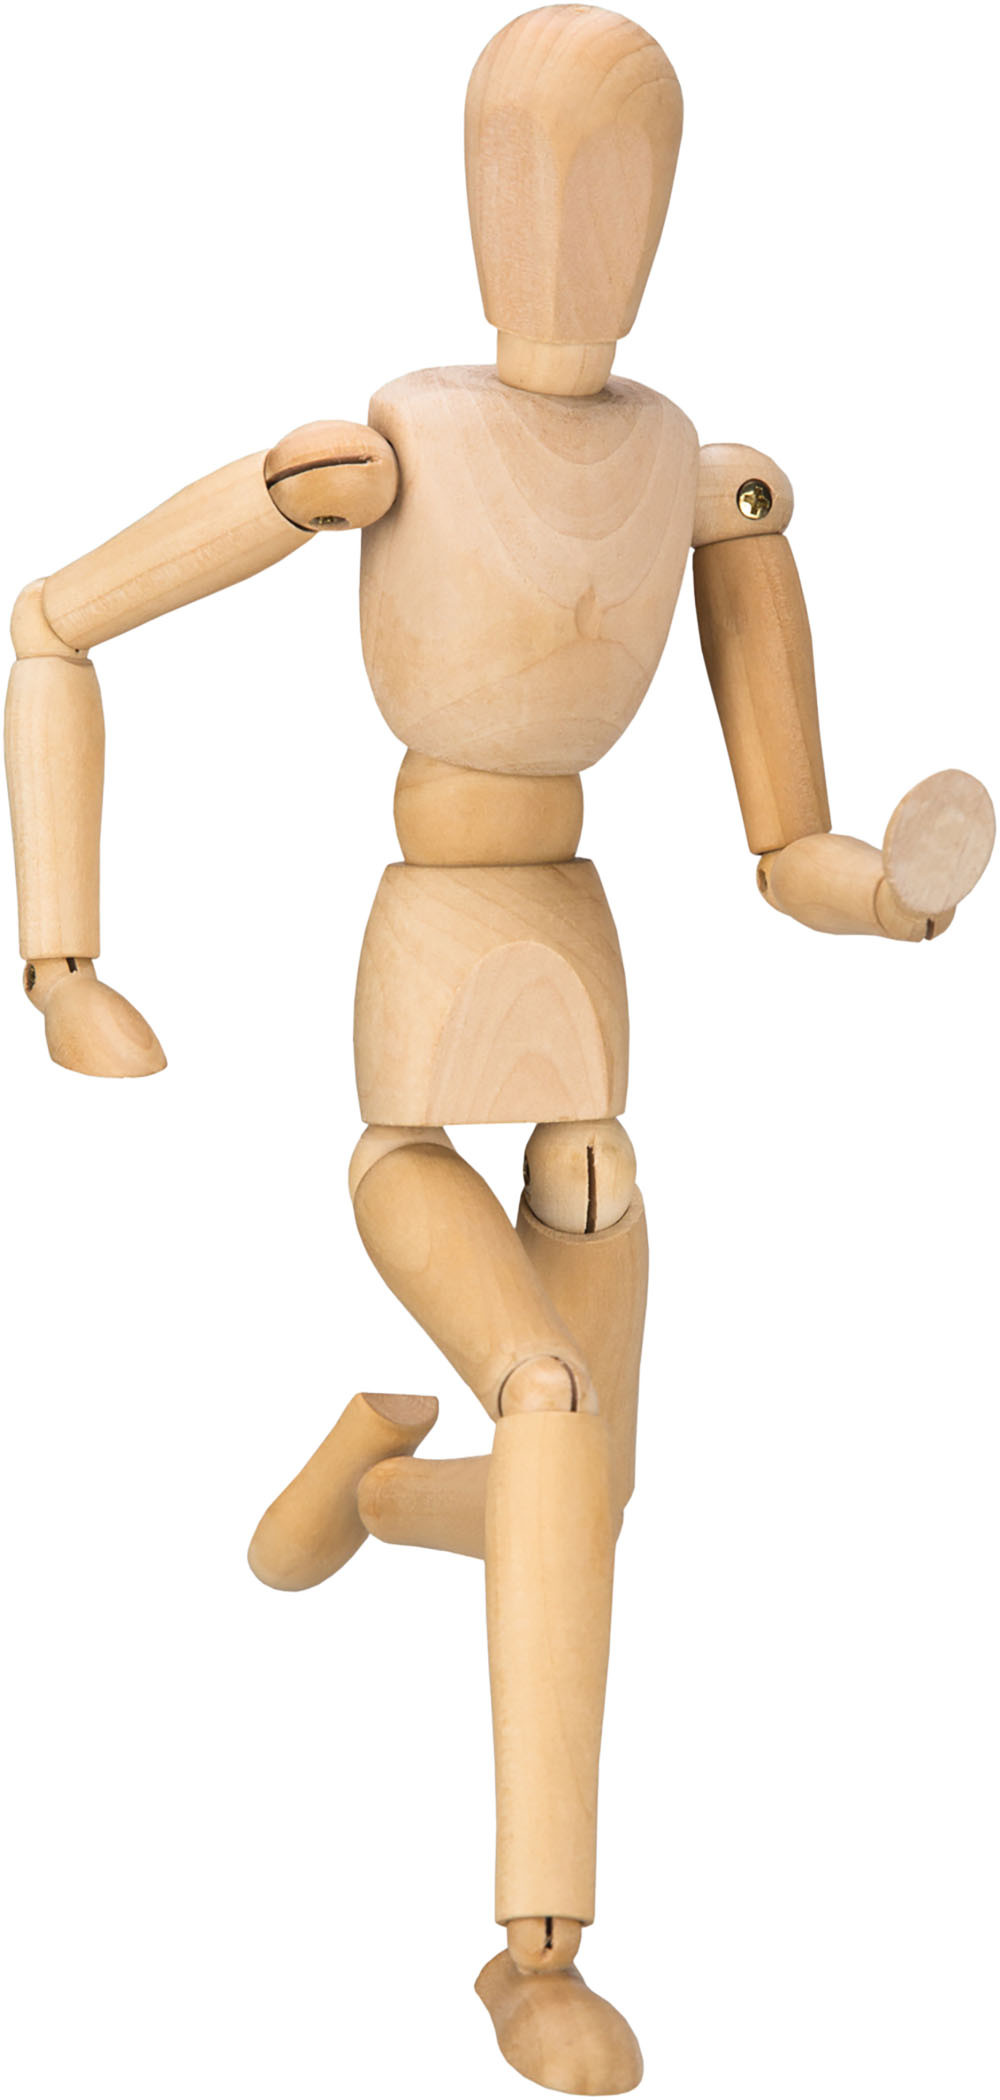 photo of a wooden figurine posed in a running position